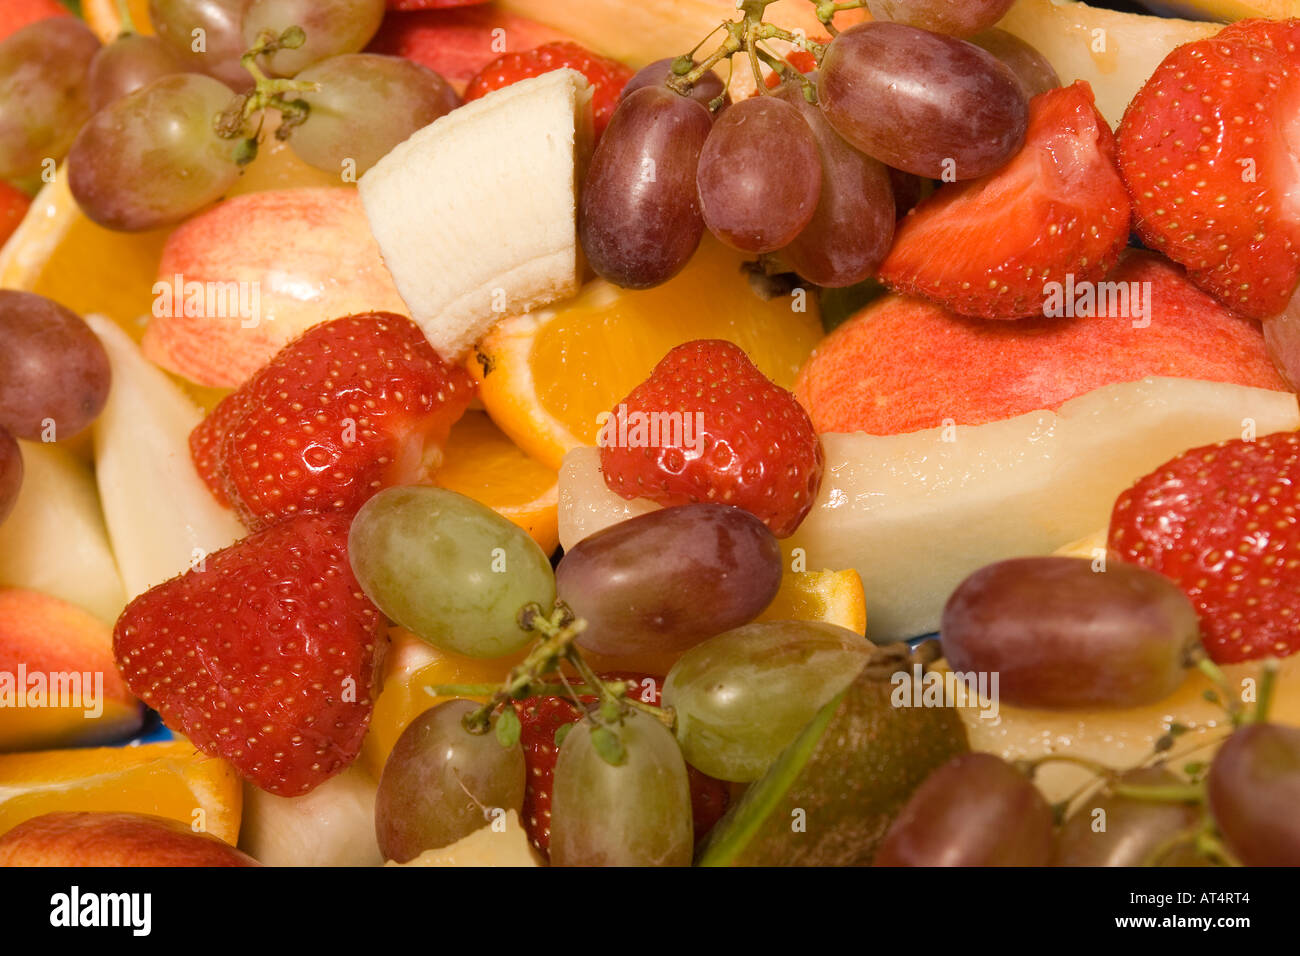 healthy eating plate of fresh fruit Stock Photo